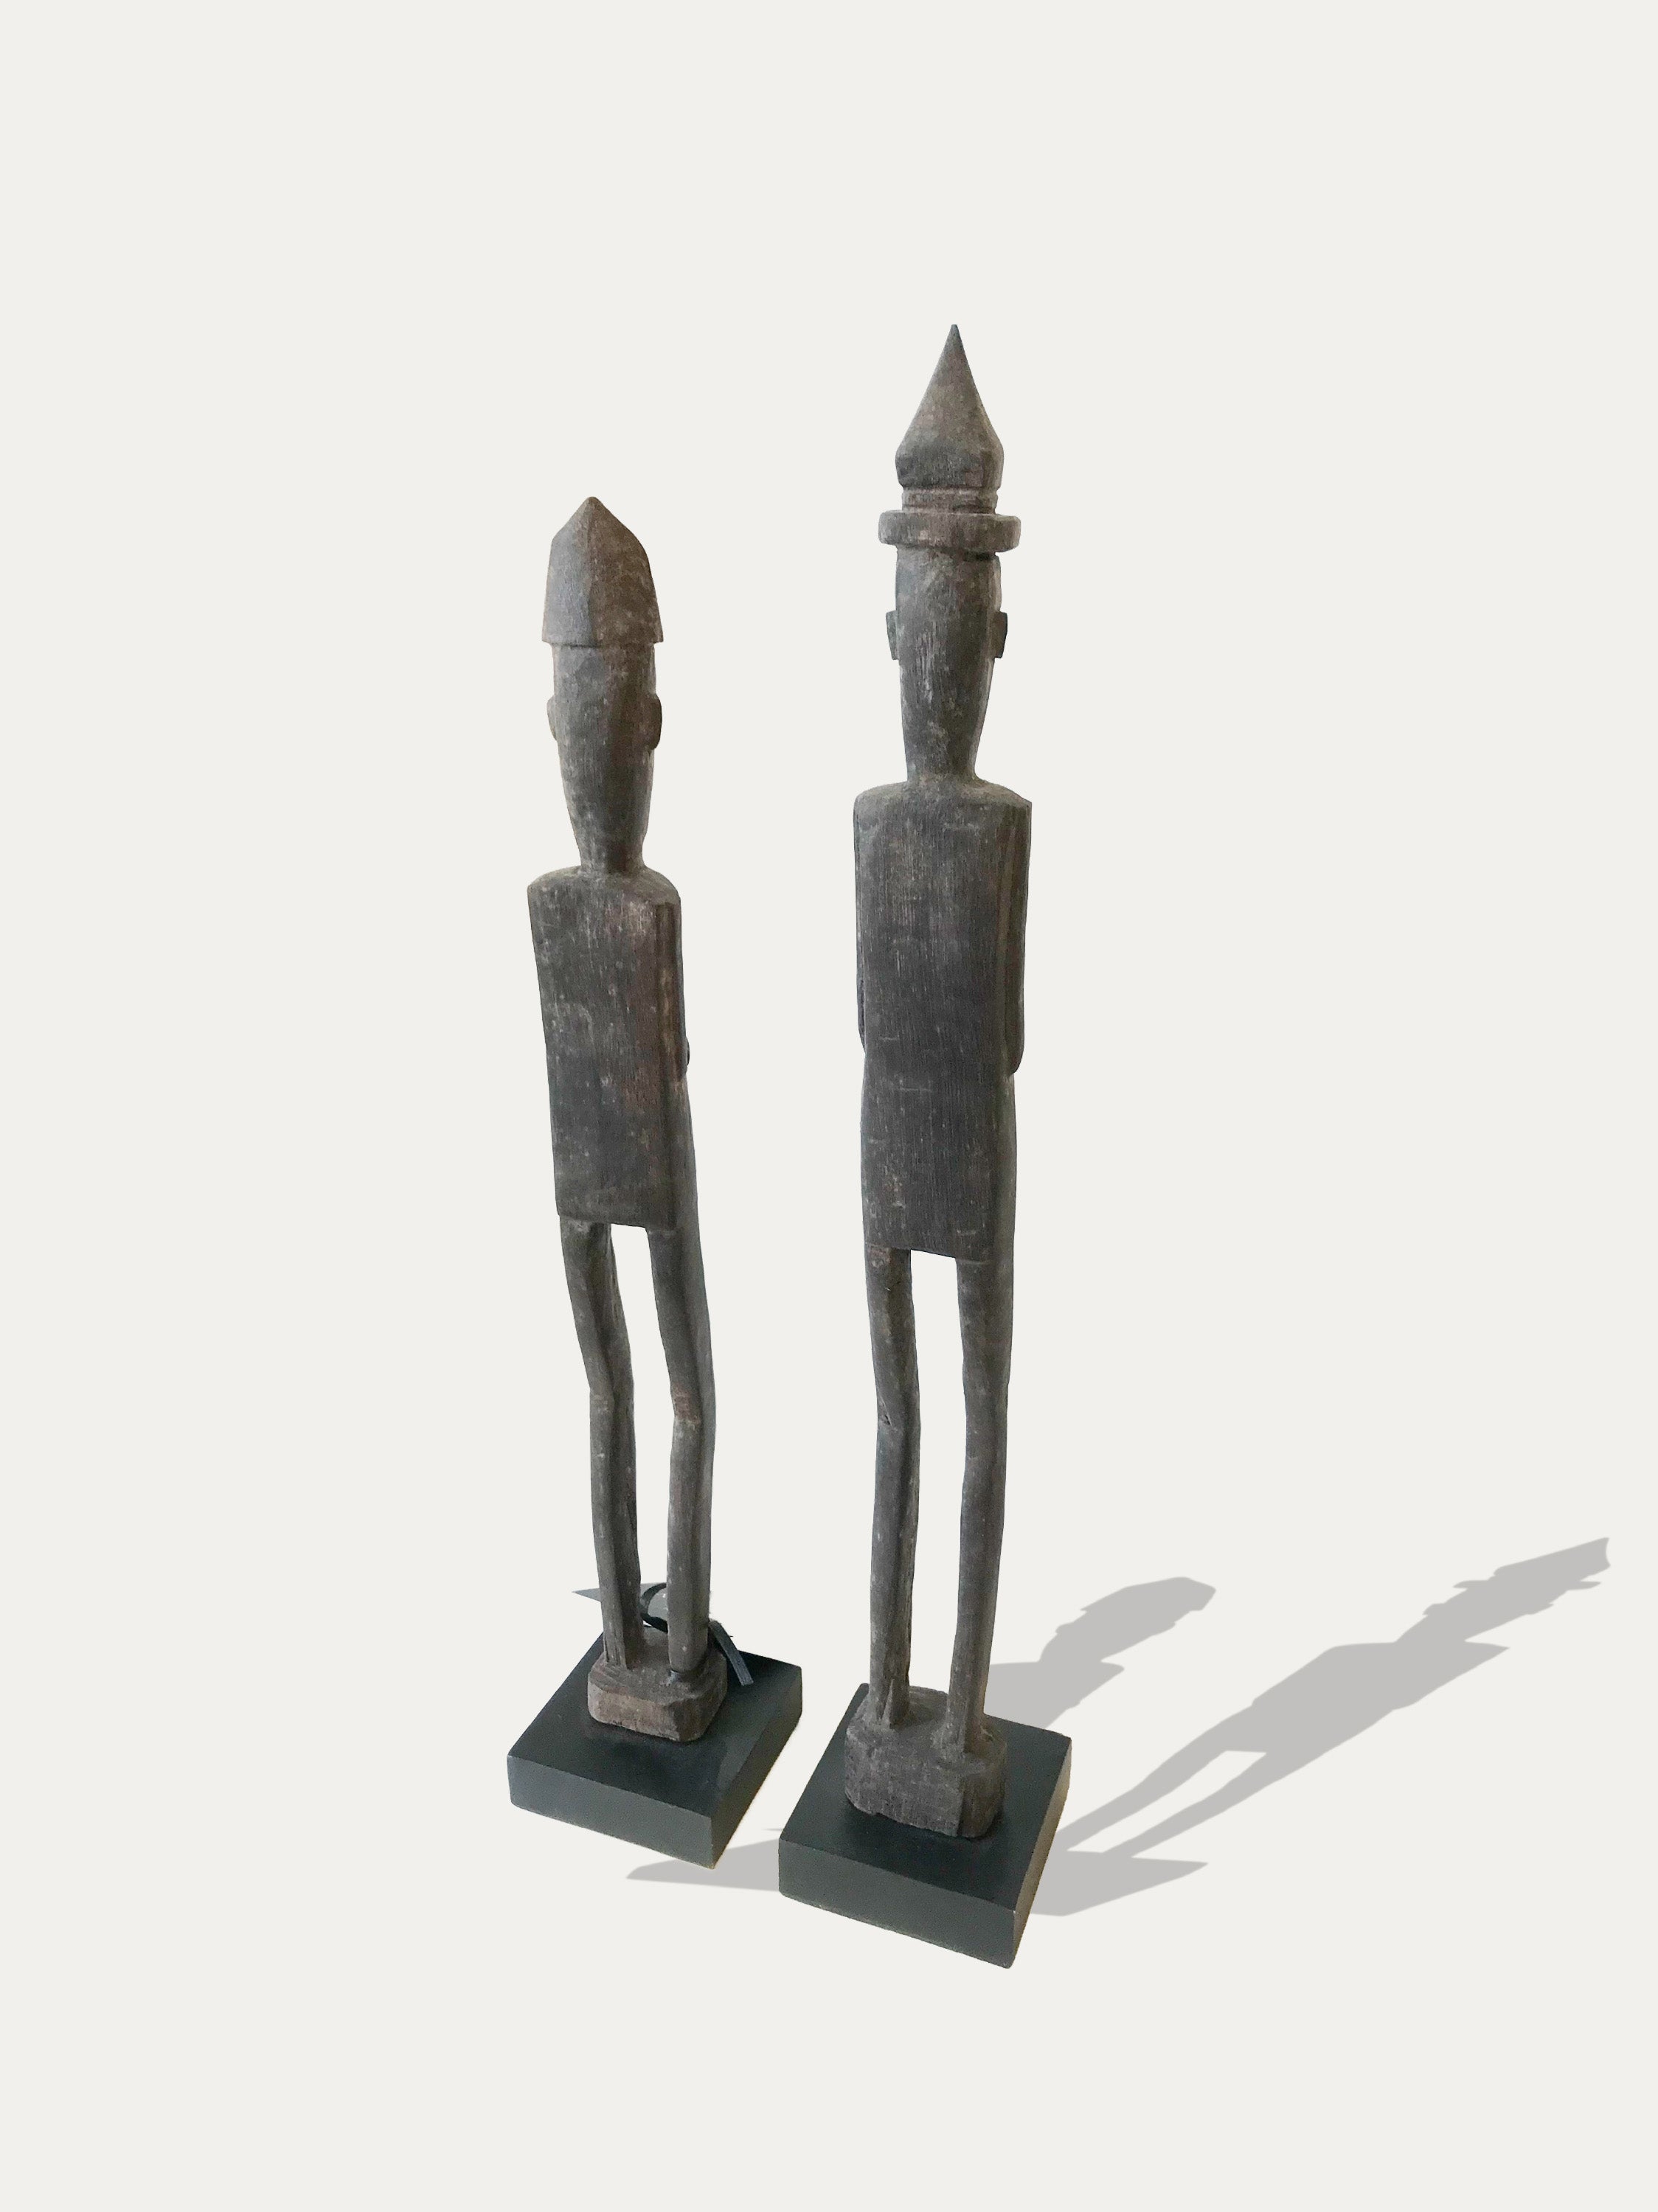 Vintage Dayak Hampatong figures from Borneo